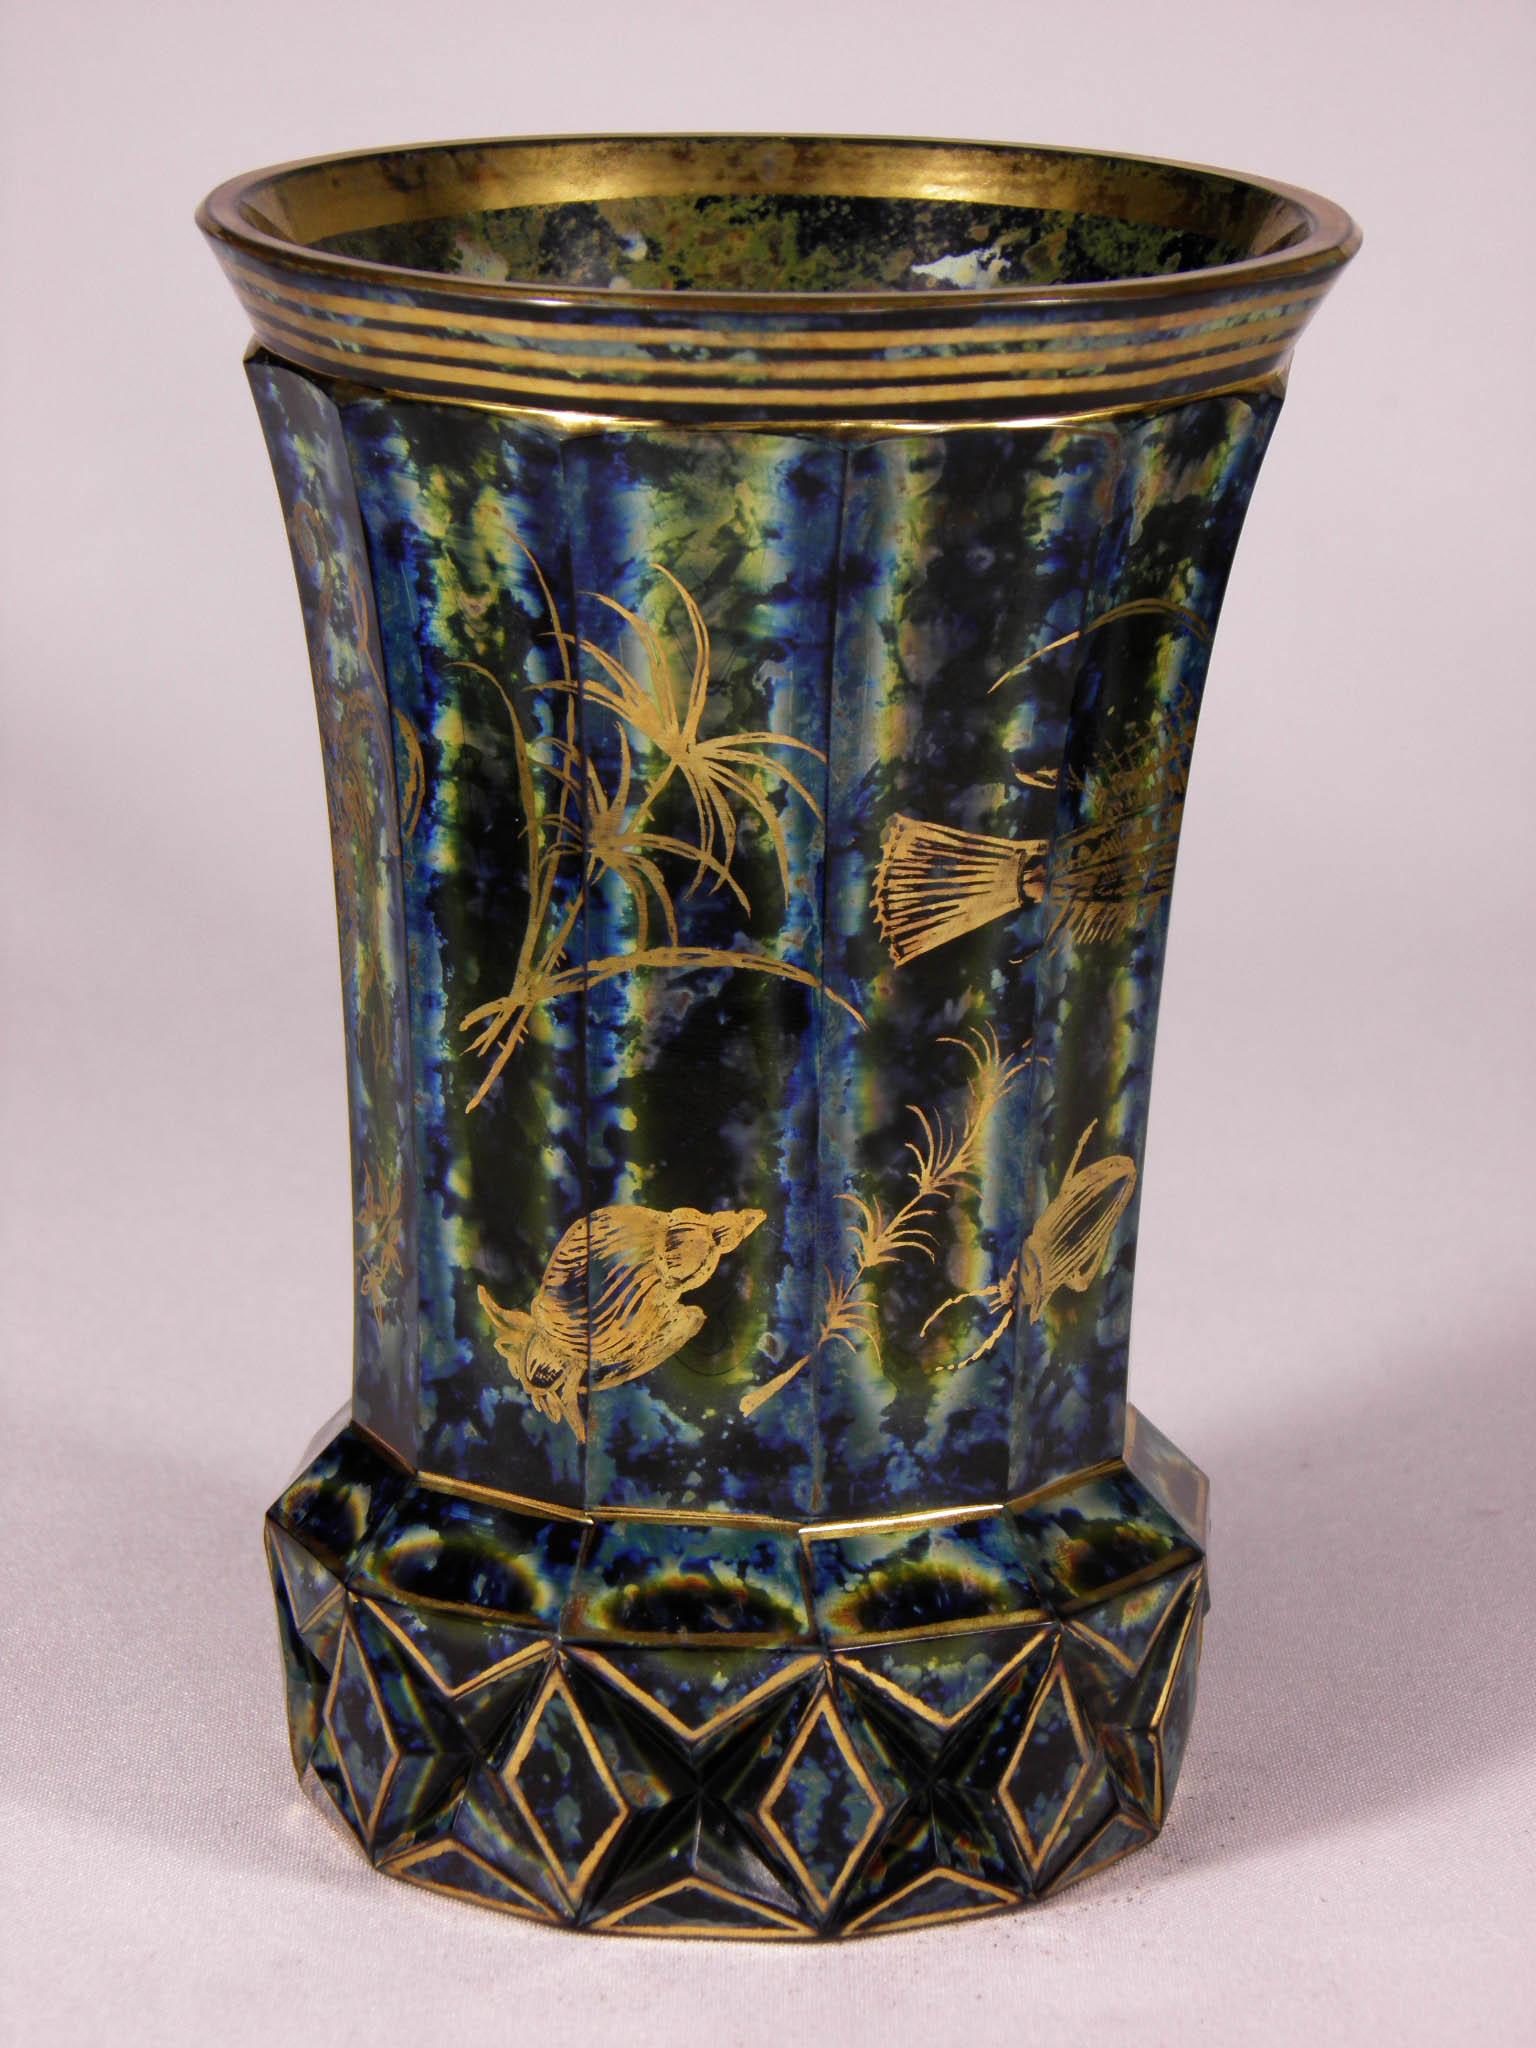 Beautiful cut goblet made of lithyalin glass with a painted with a motif of marine fauna, painted in gold, lityaline glass imitates semi-precious stones or marble, Bohemian glass 19th-20th century
A beautiful piece in the collection for lovers of